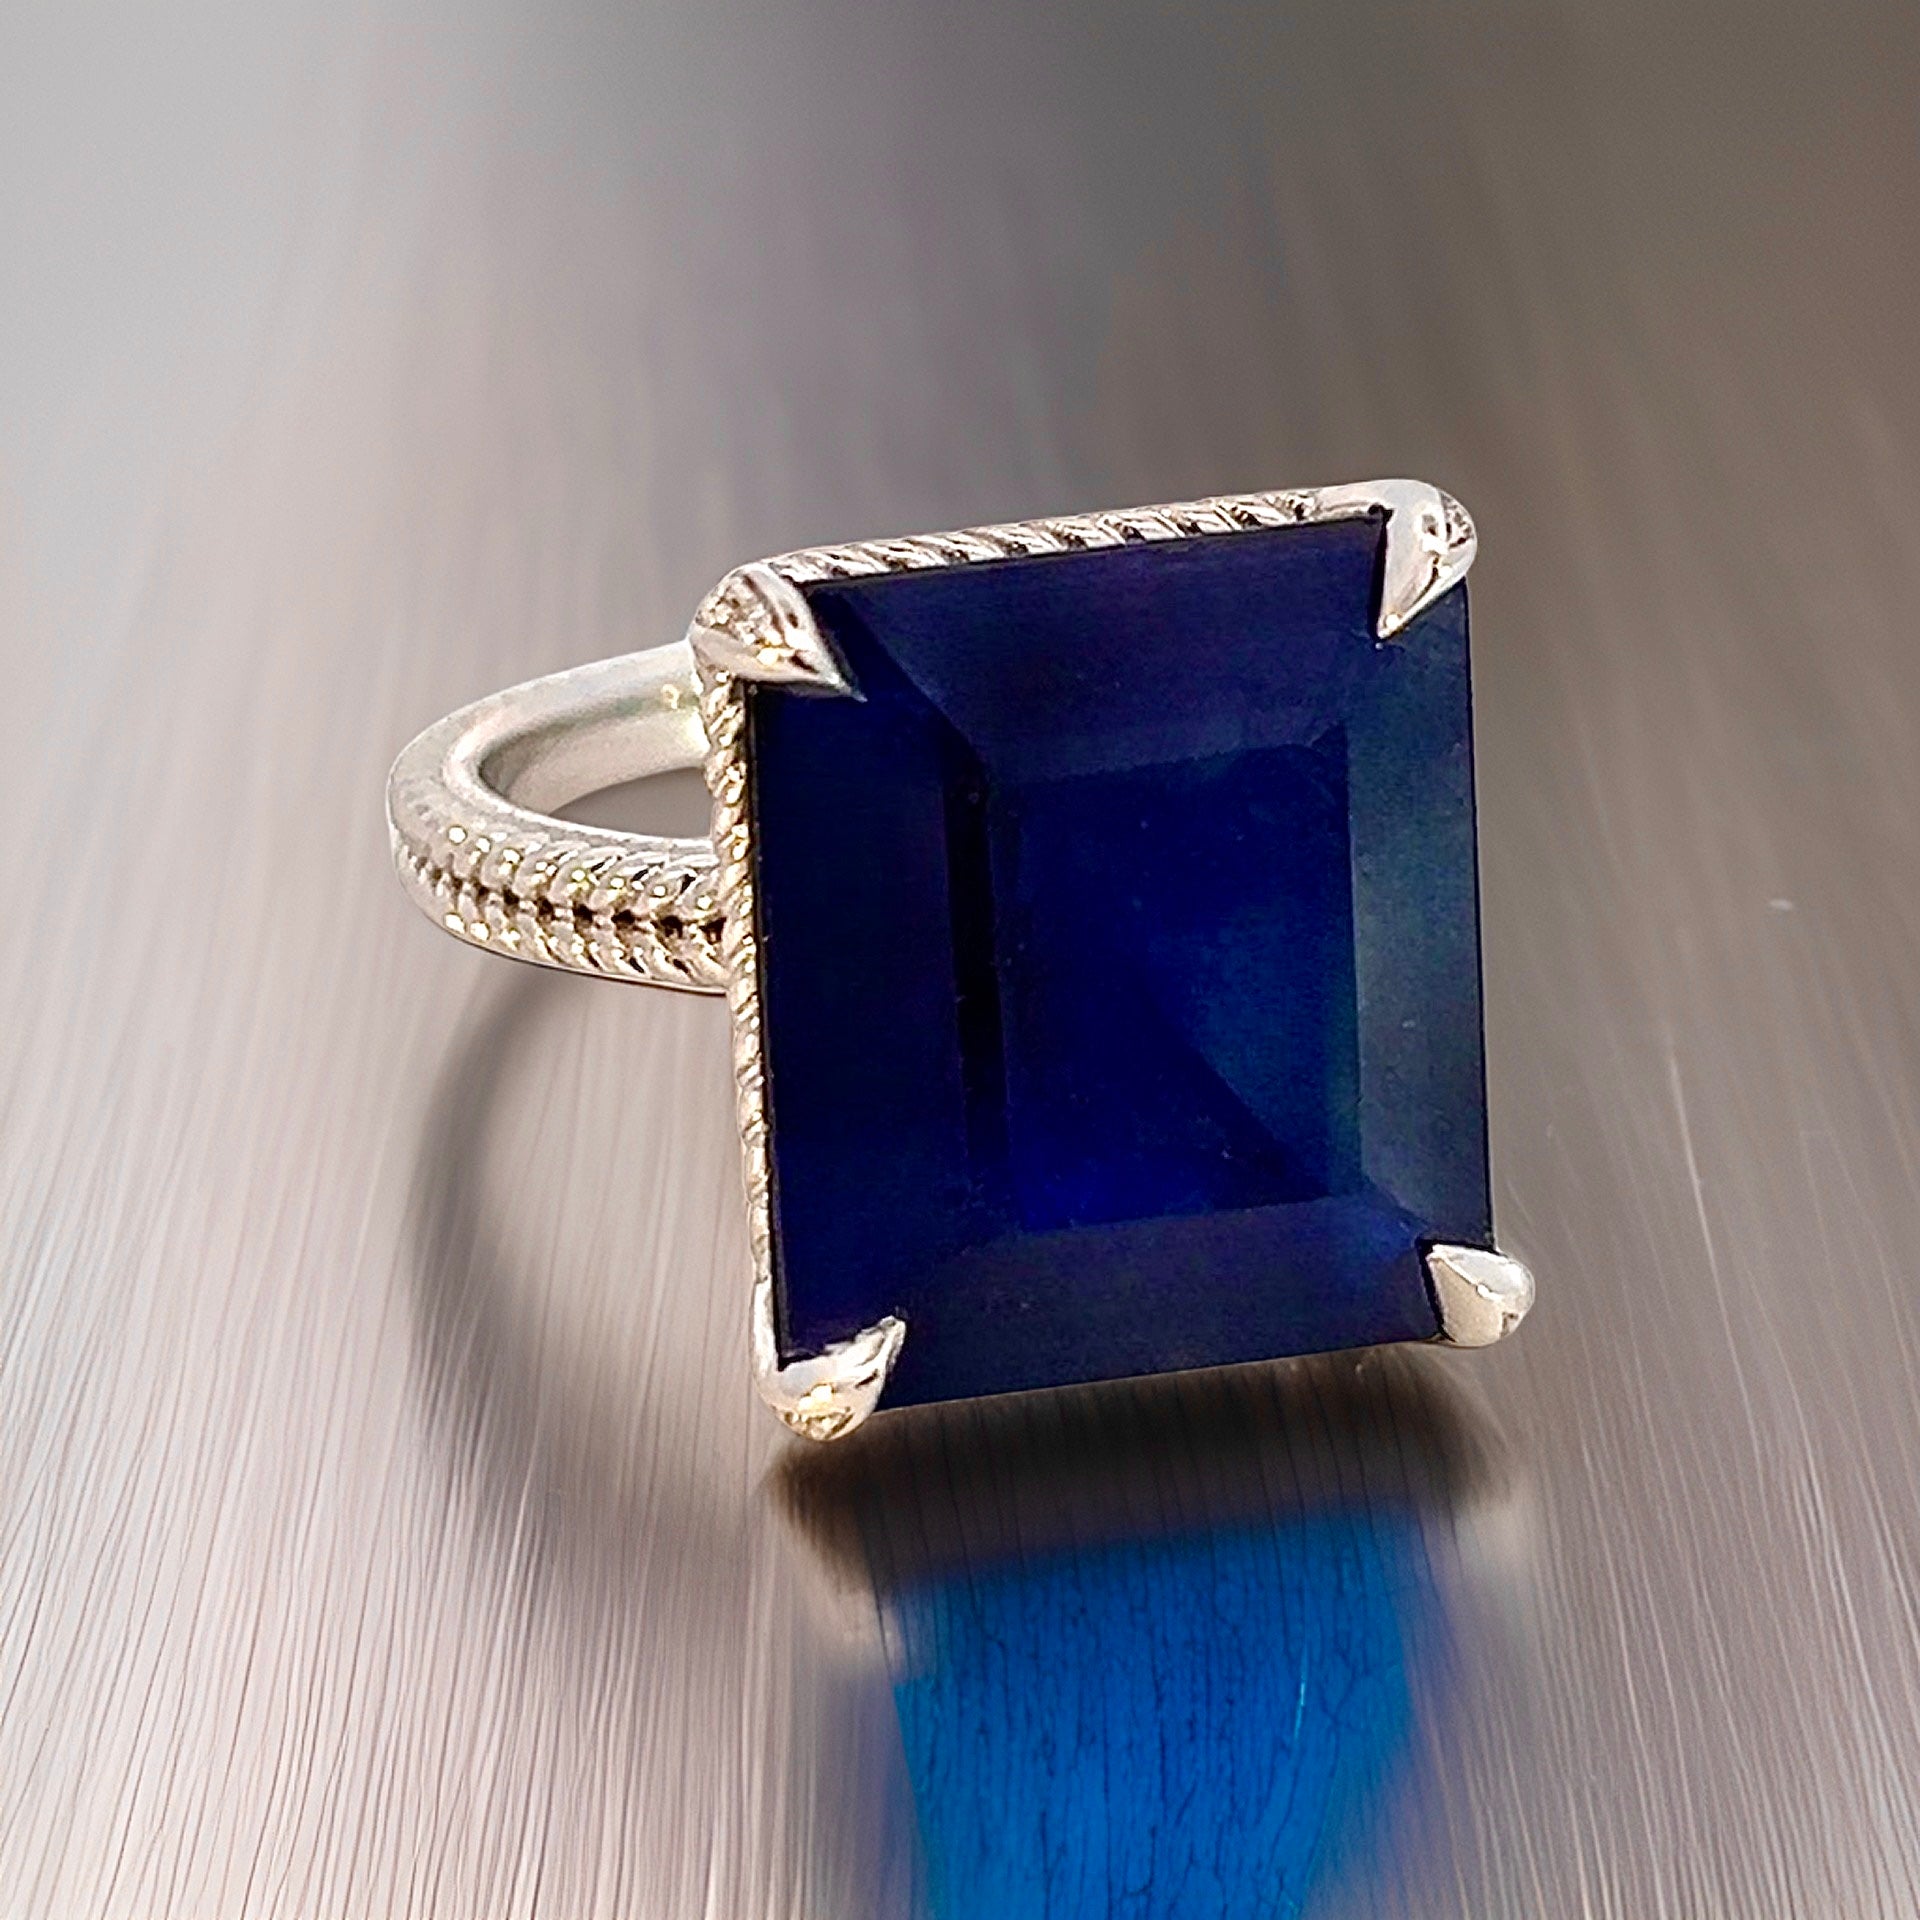 Natural Solitaire Sapphire Ring 6.5 14k W Gold 7 TCW Certified $3,150 310545 - Certified Fine Jewelry